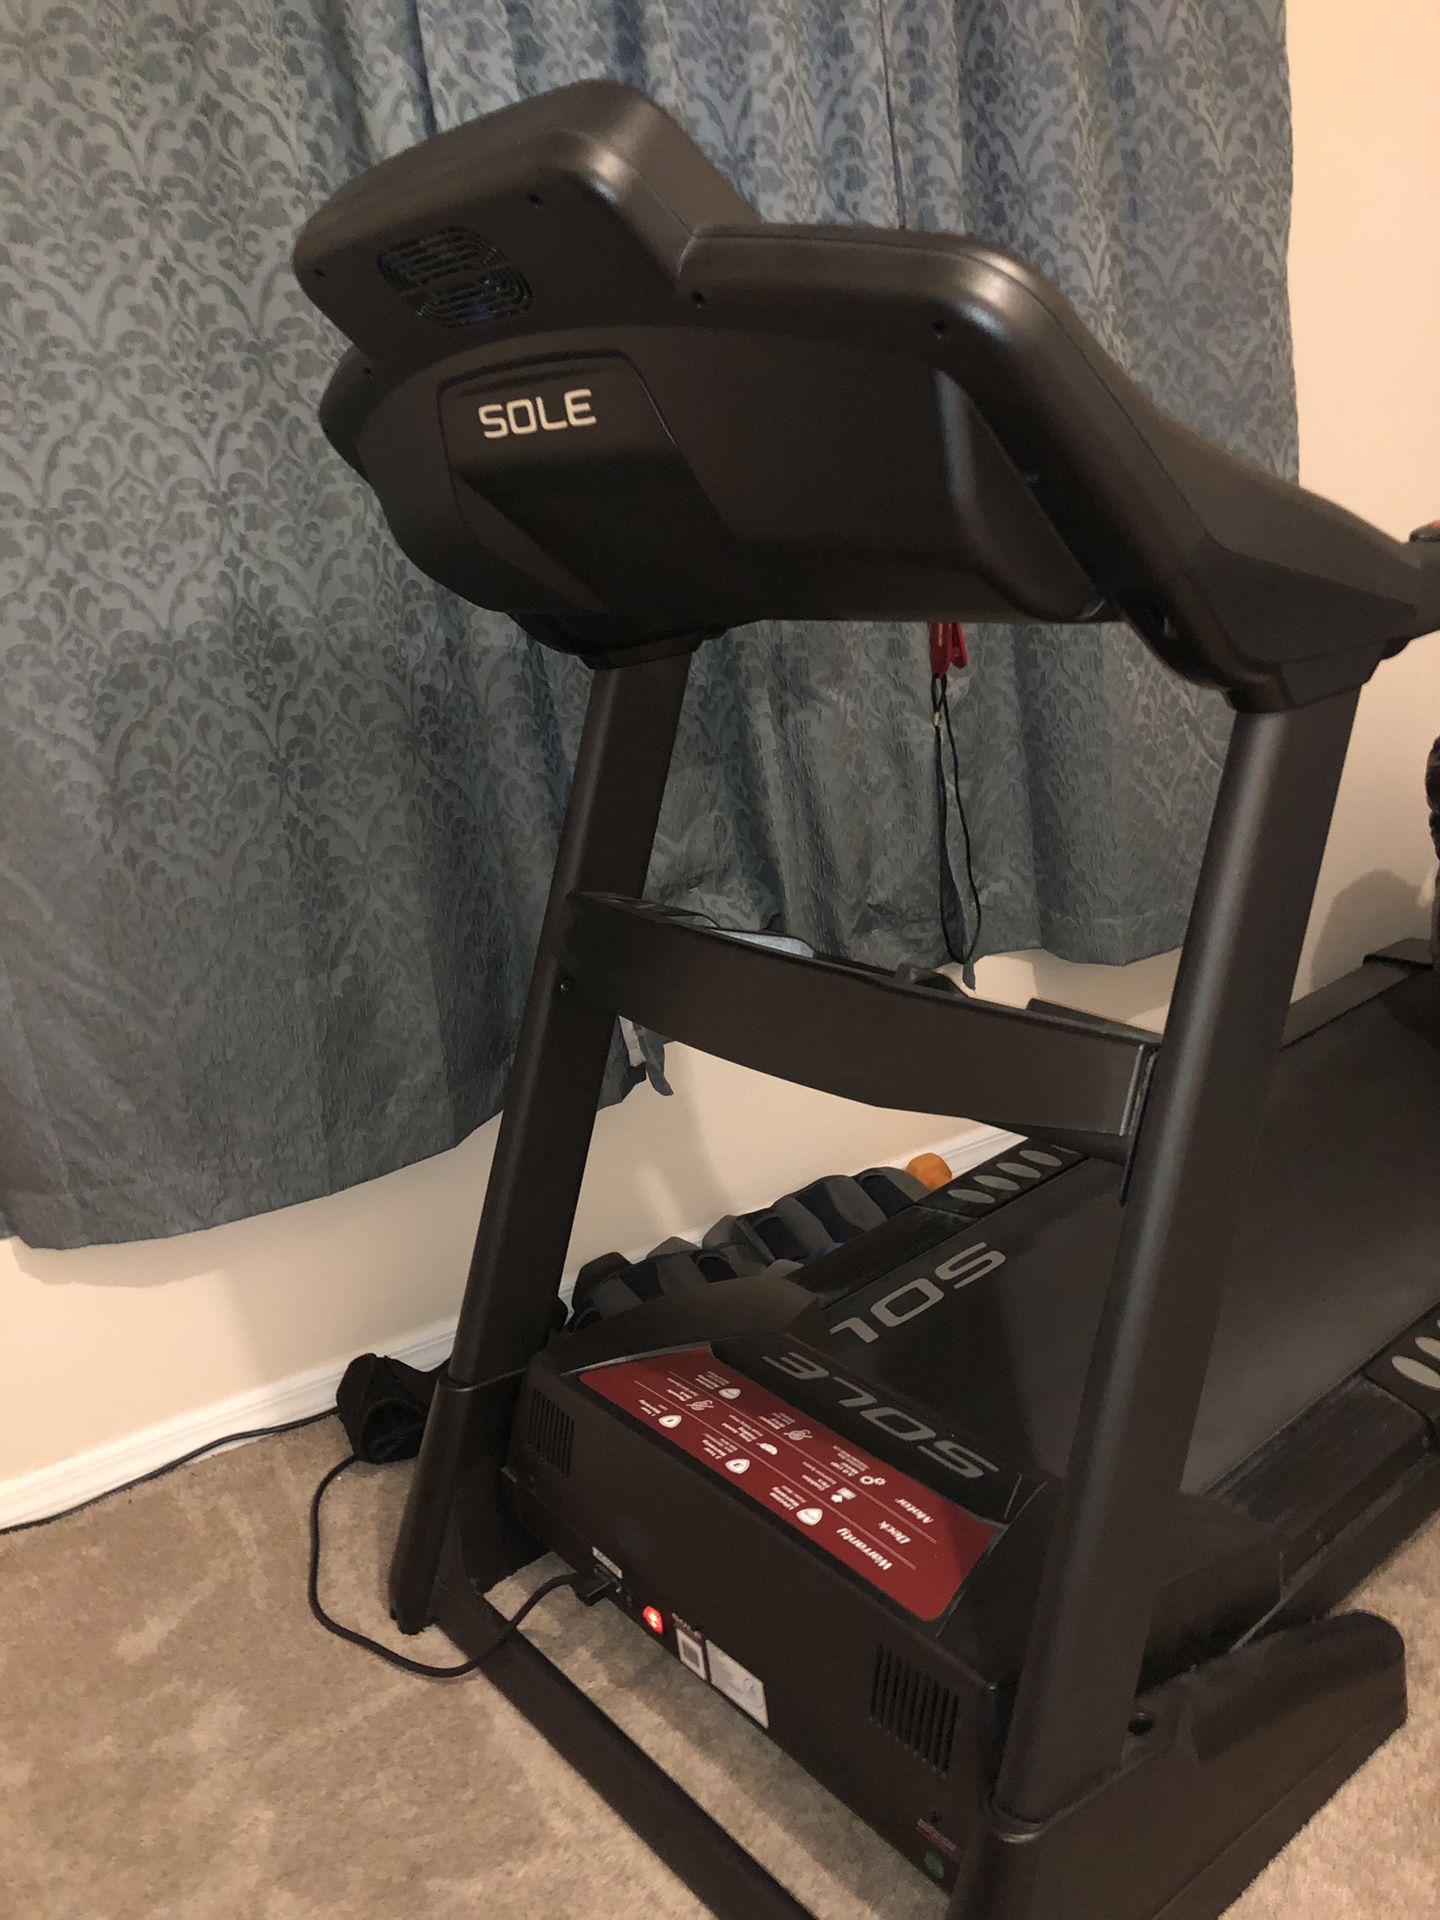 Gently used sole treadmill in excellent shape!